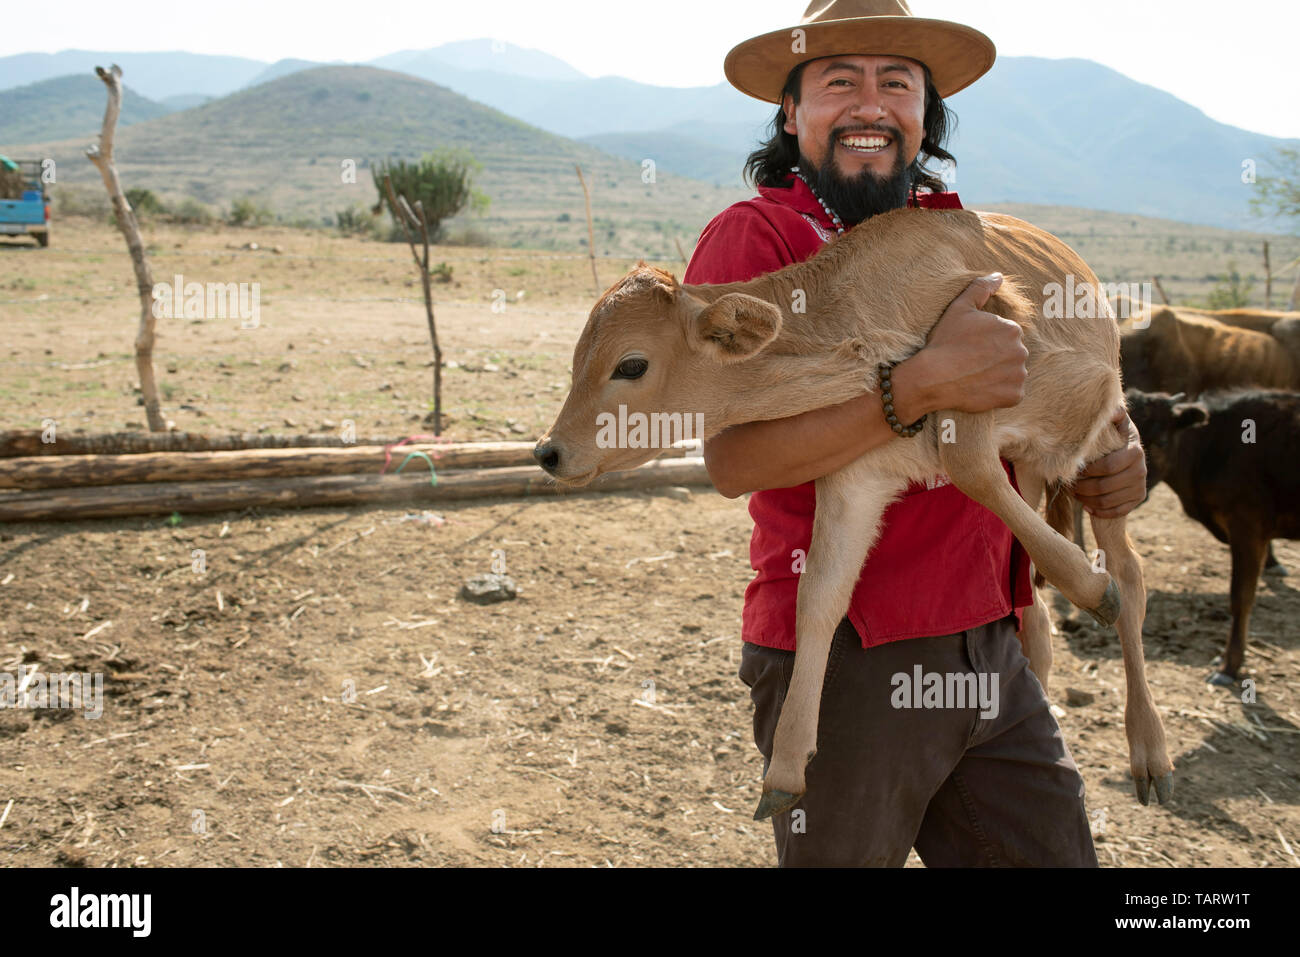 Farm life with happy Zapotec farmer holding a Brahman calf (baby cow). MR can be arranged, pls enquire. Teotitlan del Valle, Oaxaca, Mexico. May 2019 Stock Photo